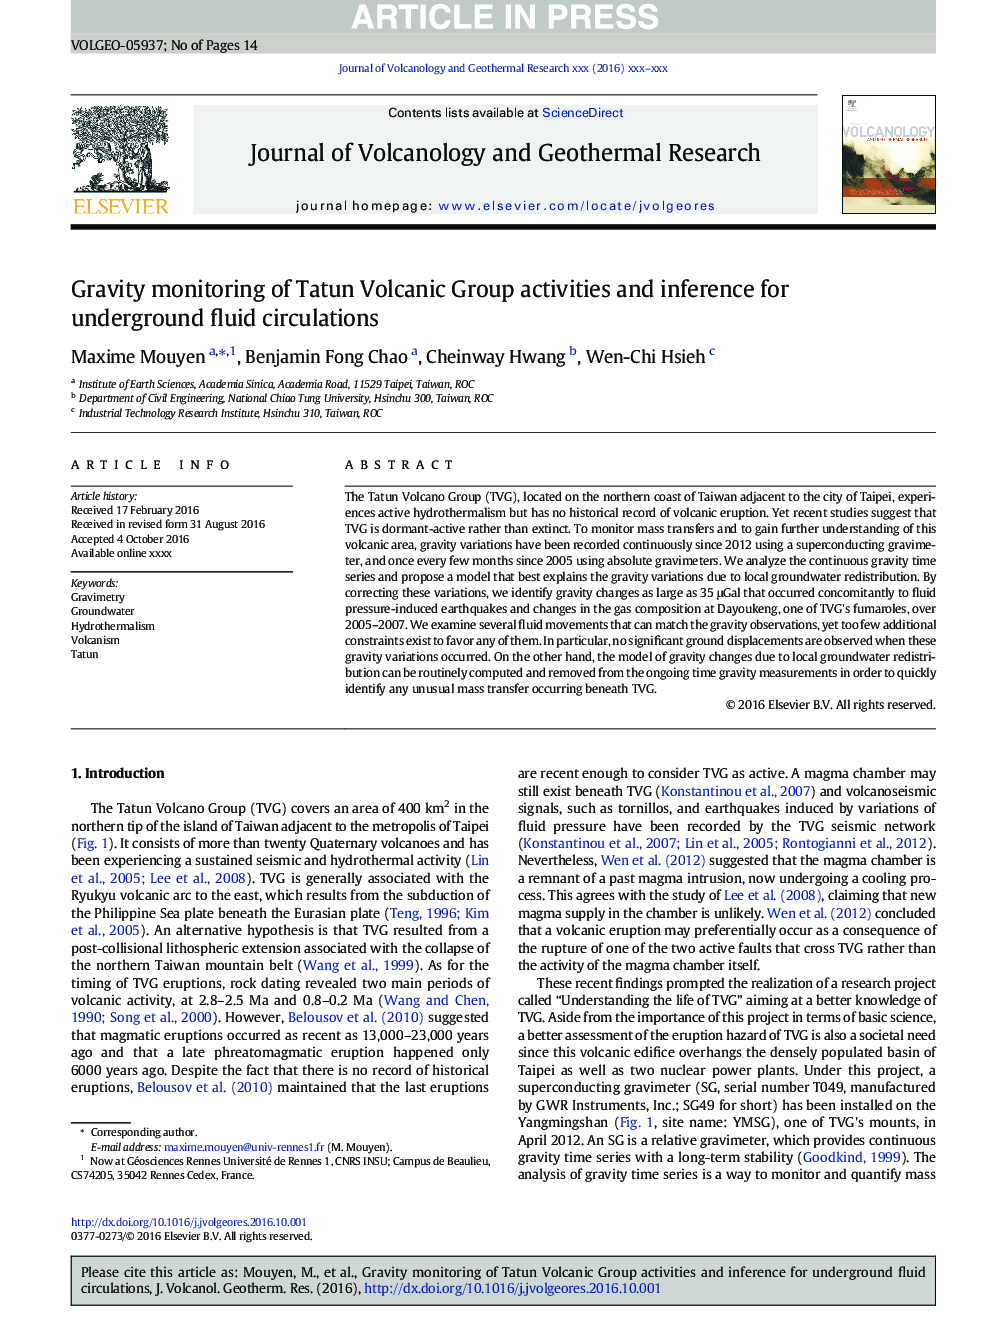 Gravity monitoring of Tatun Volcanic Group activities and inference for underground fluid circulations